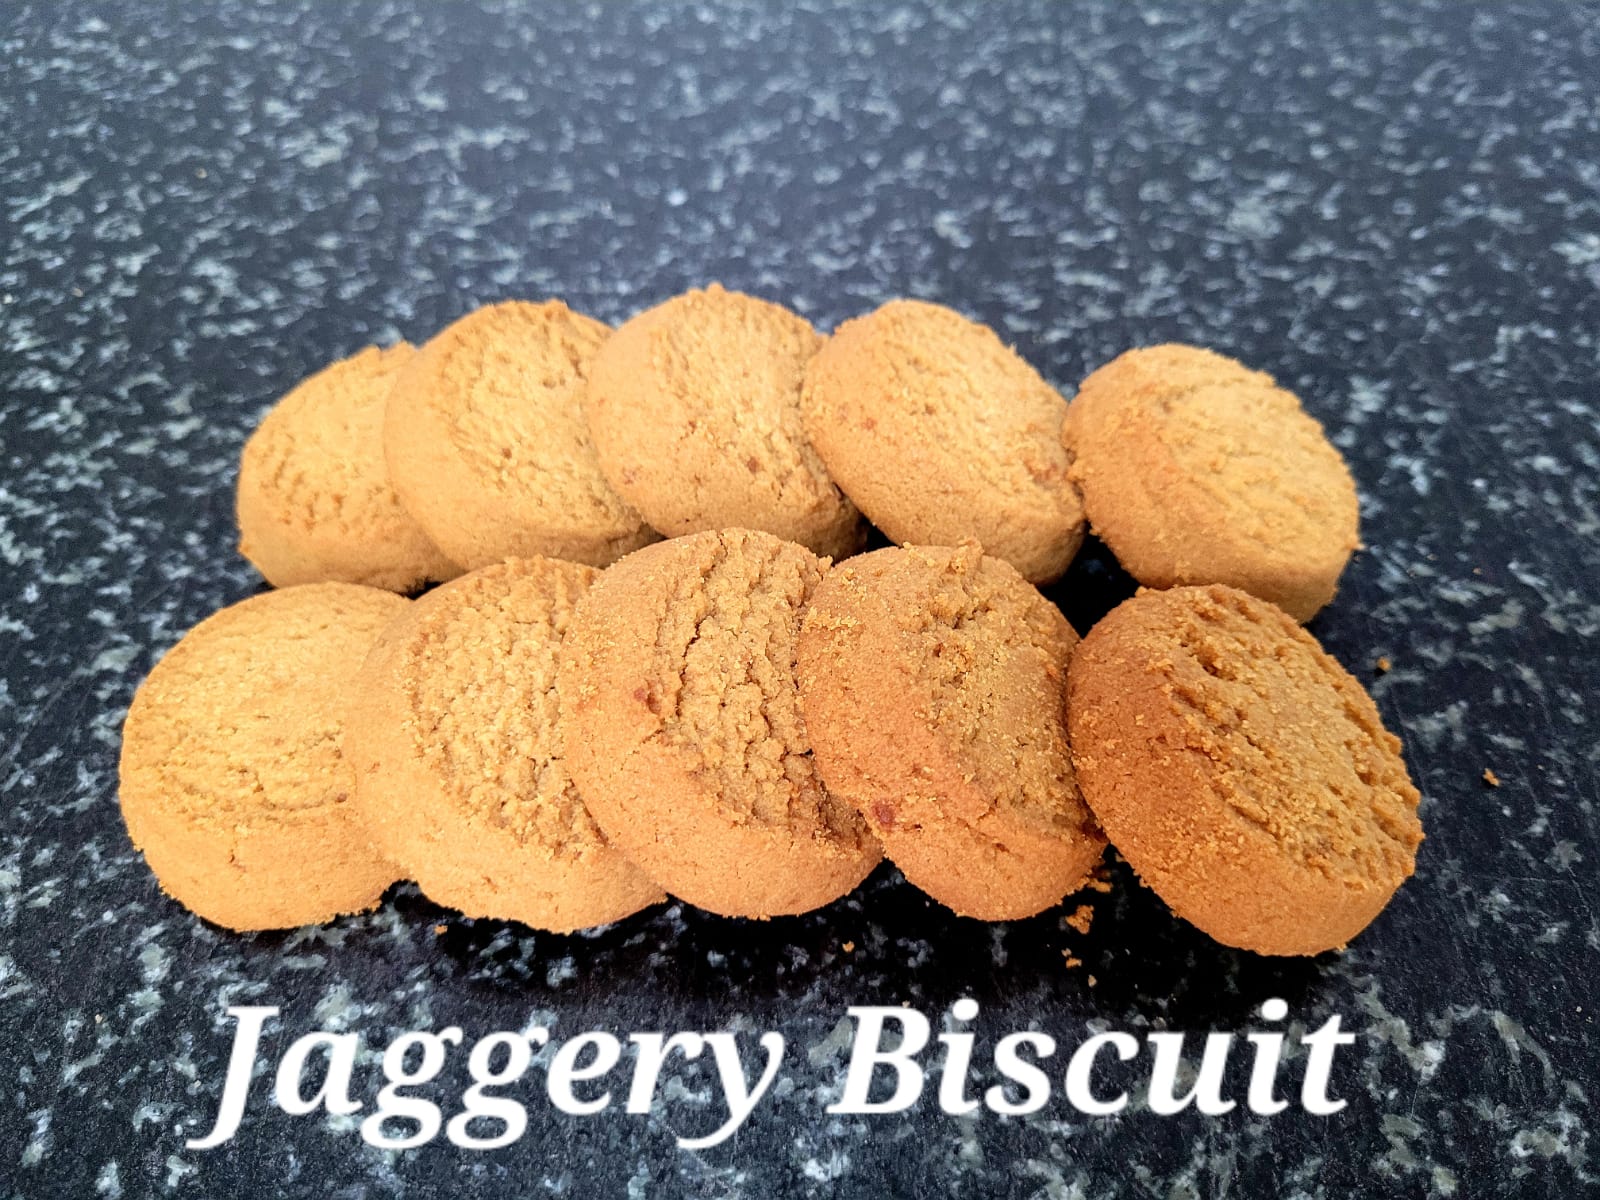 Jaggery biscuits